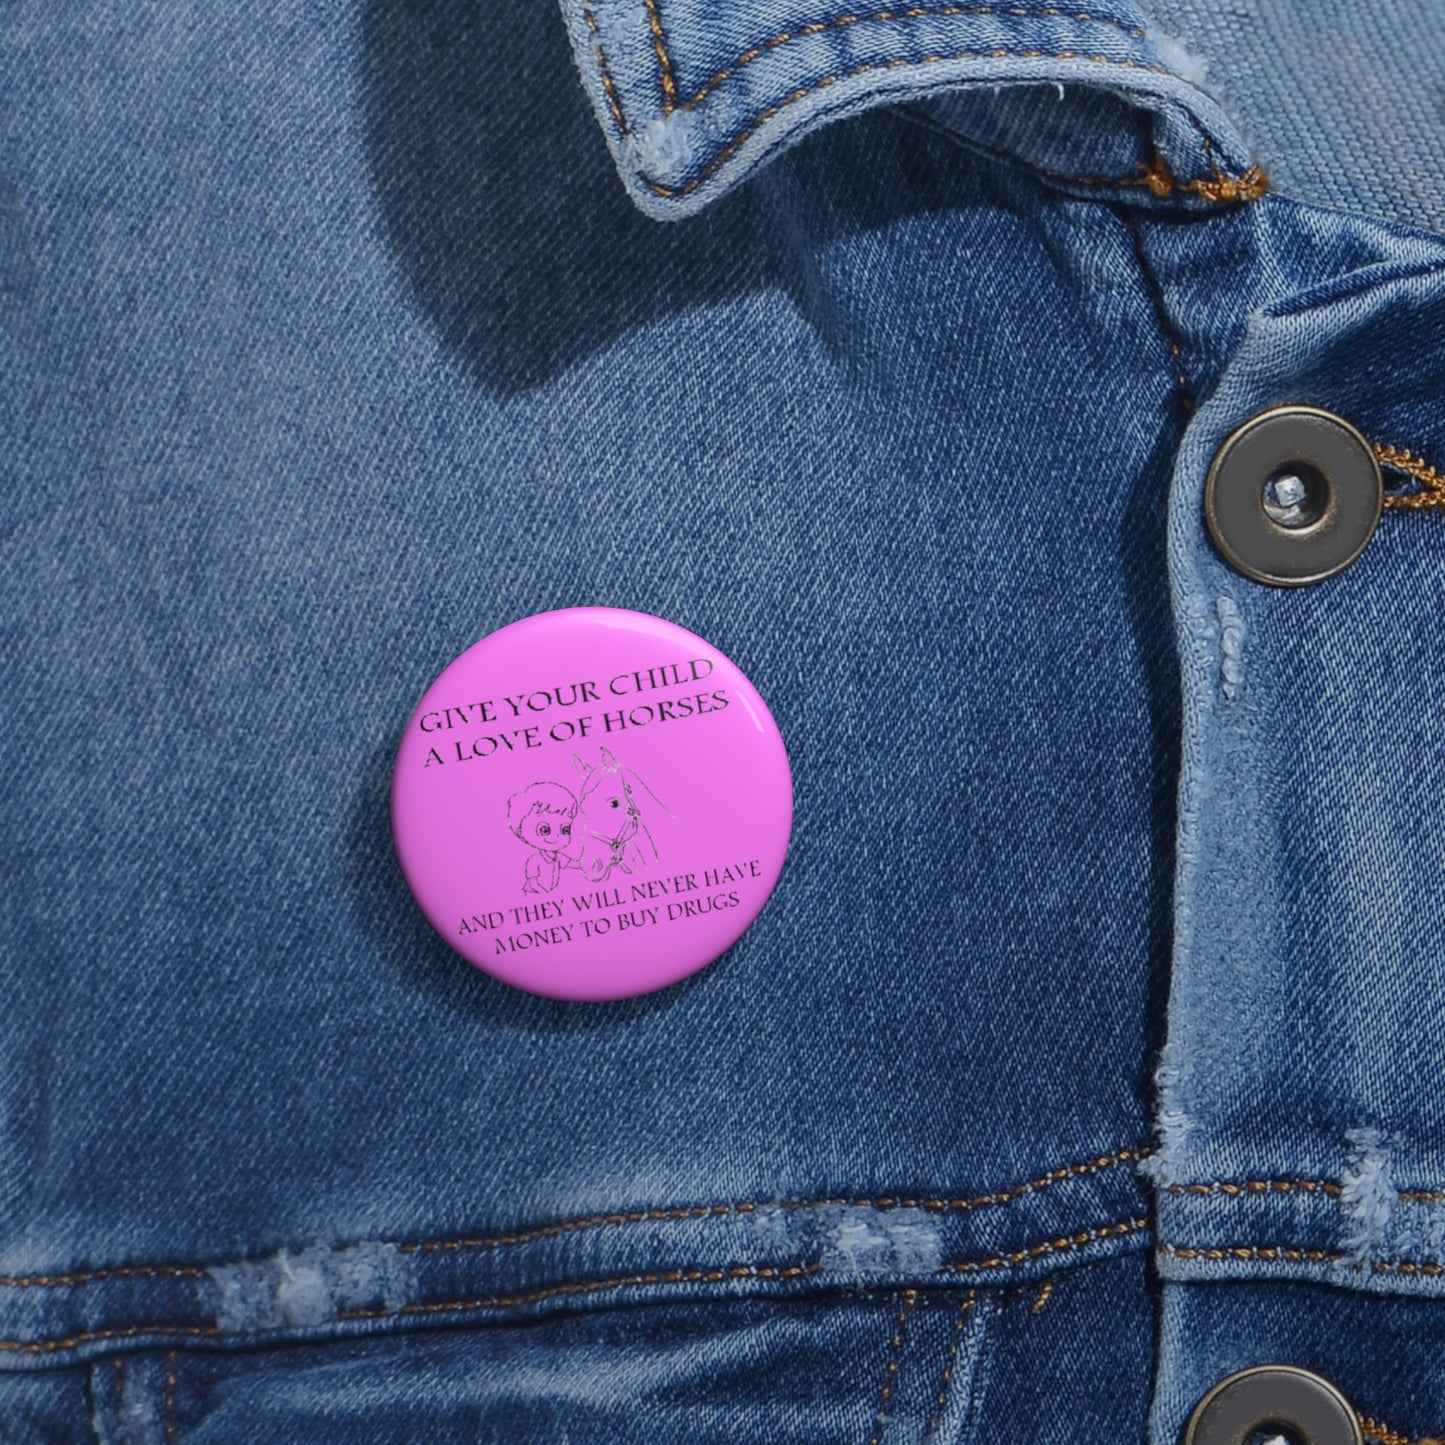 Say NO to Drugs - Custom Pin Buttons - Pink